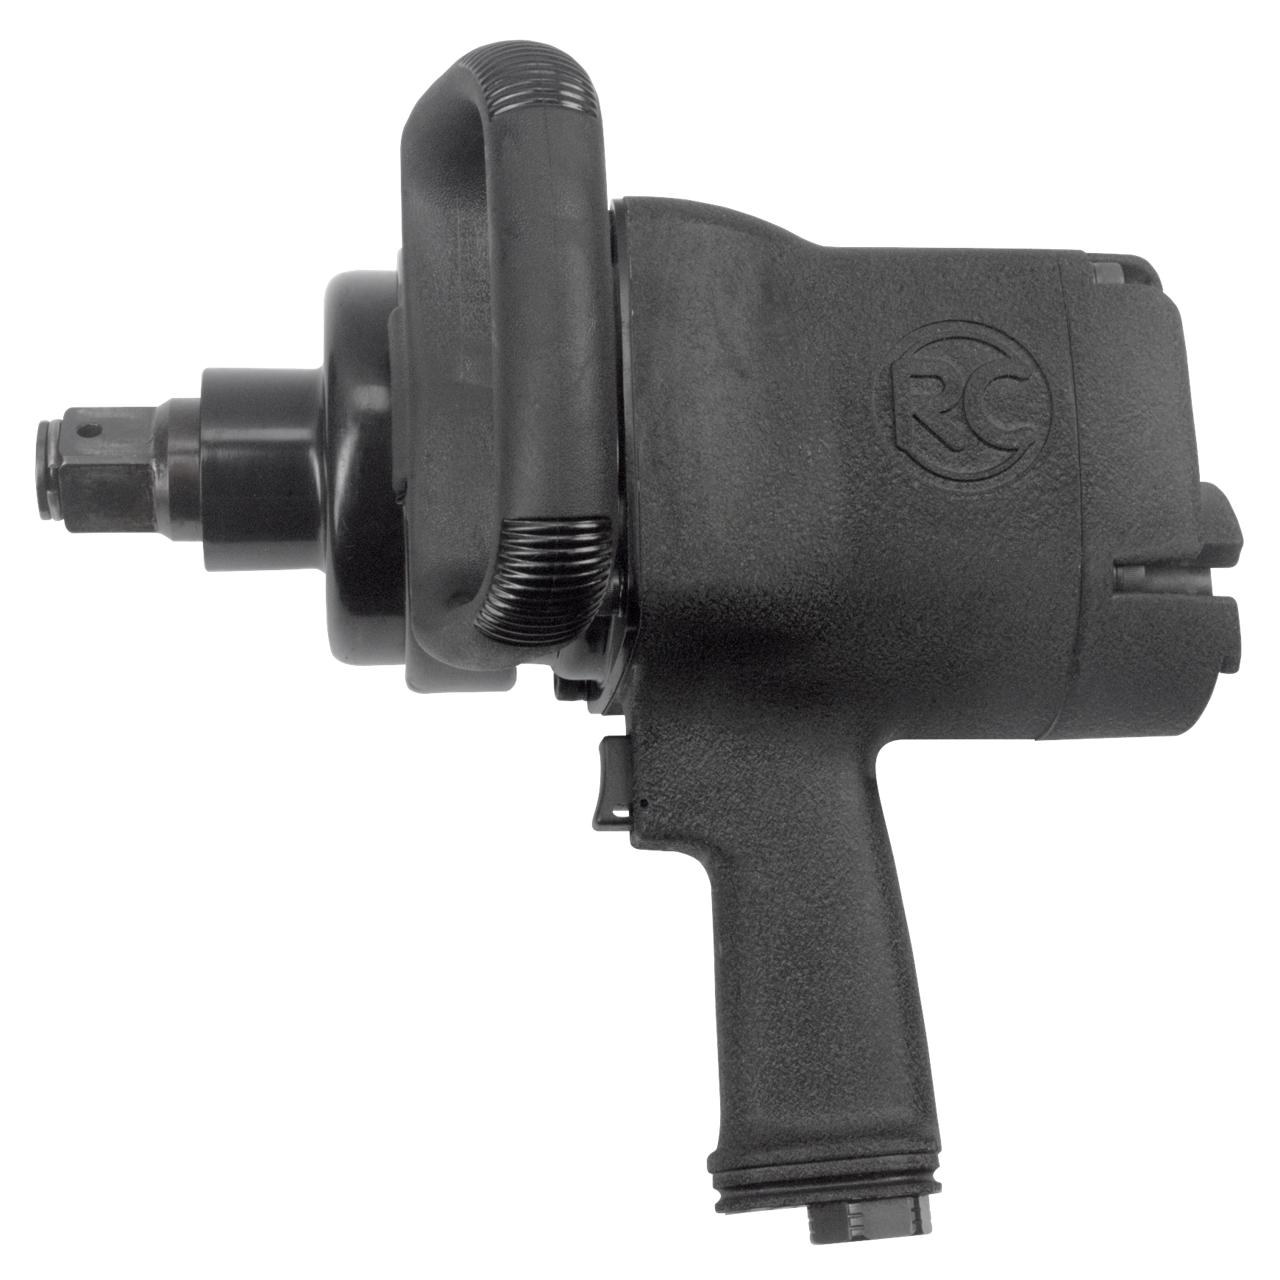 RC2425 1" Impact wrench